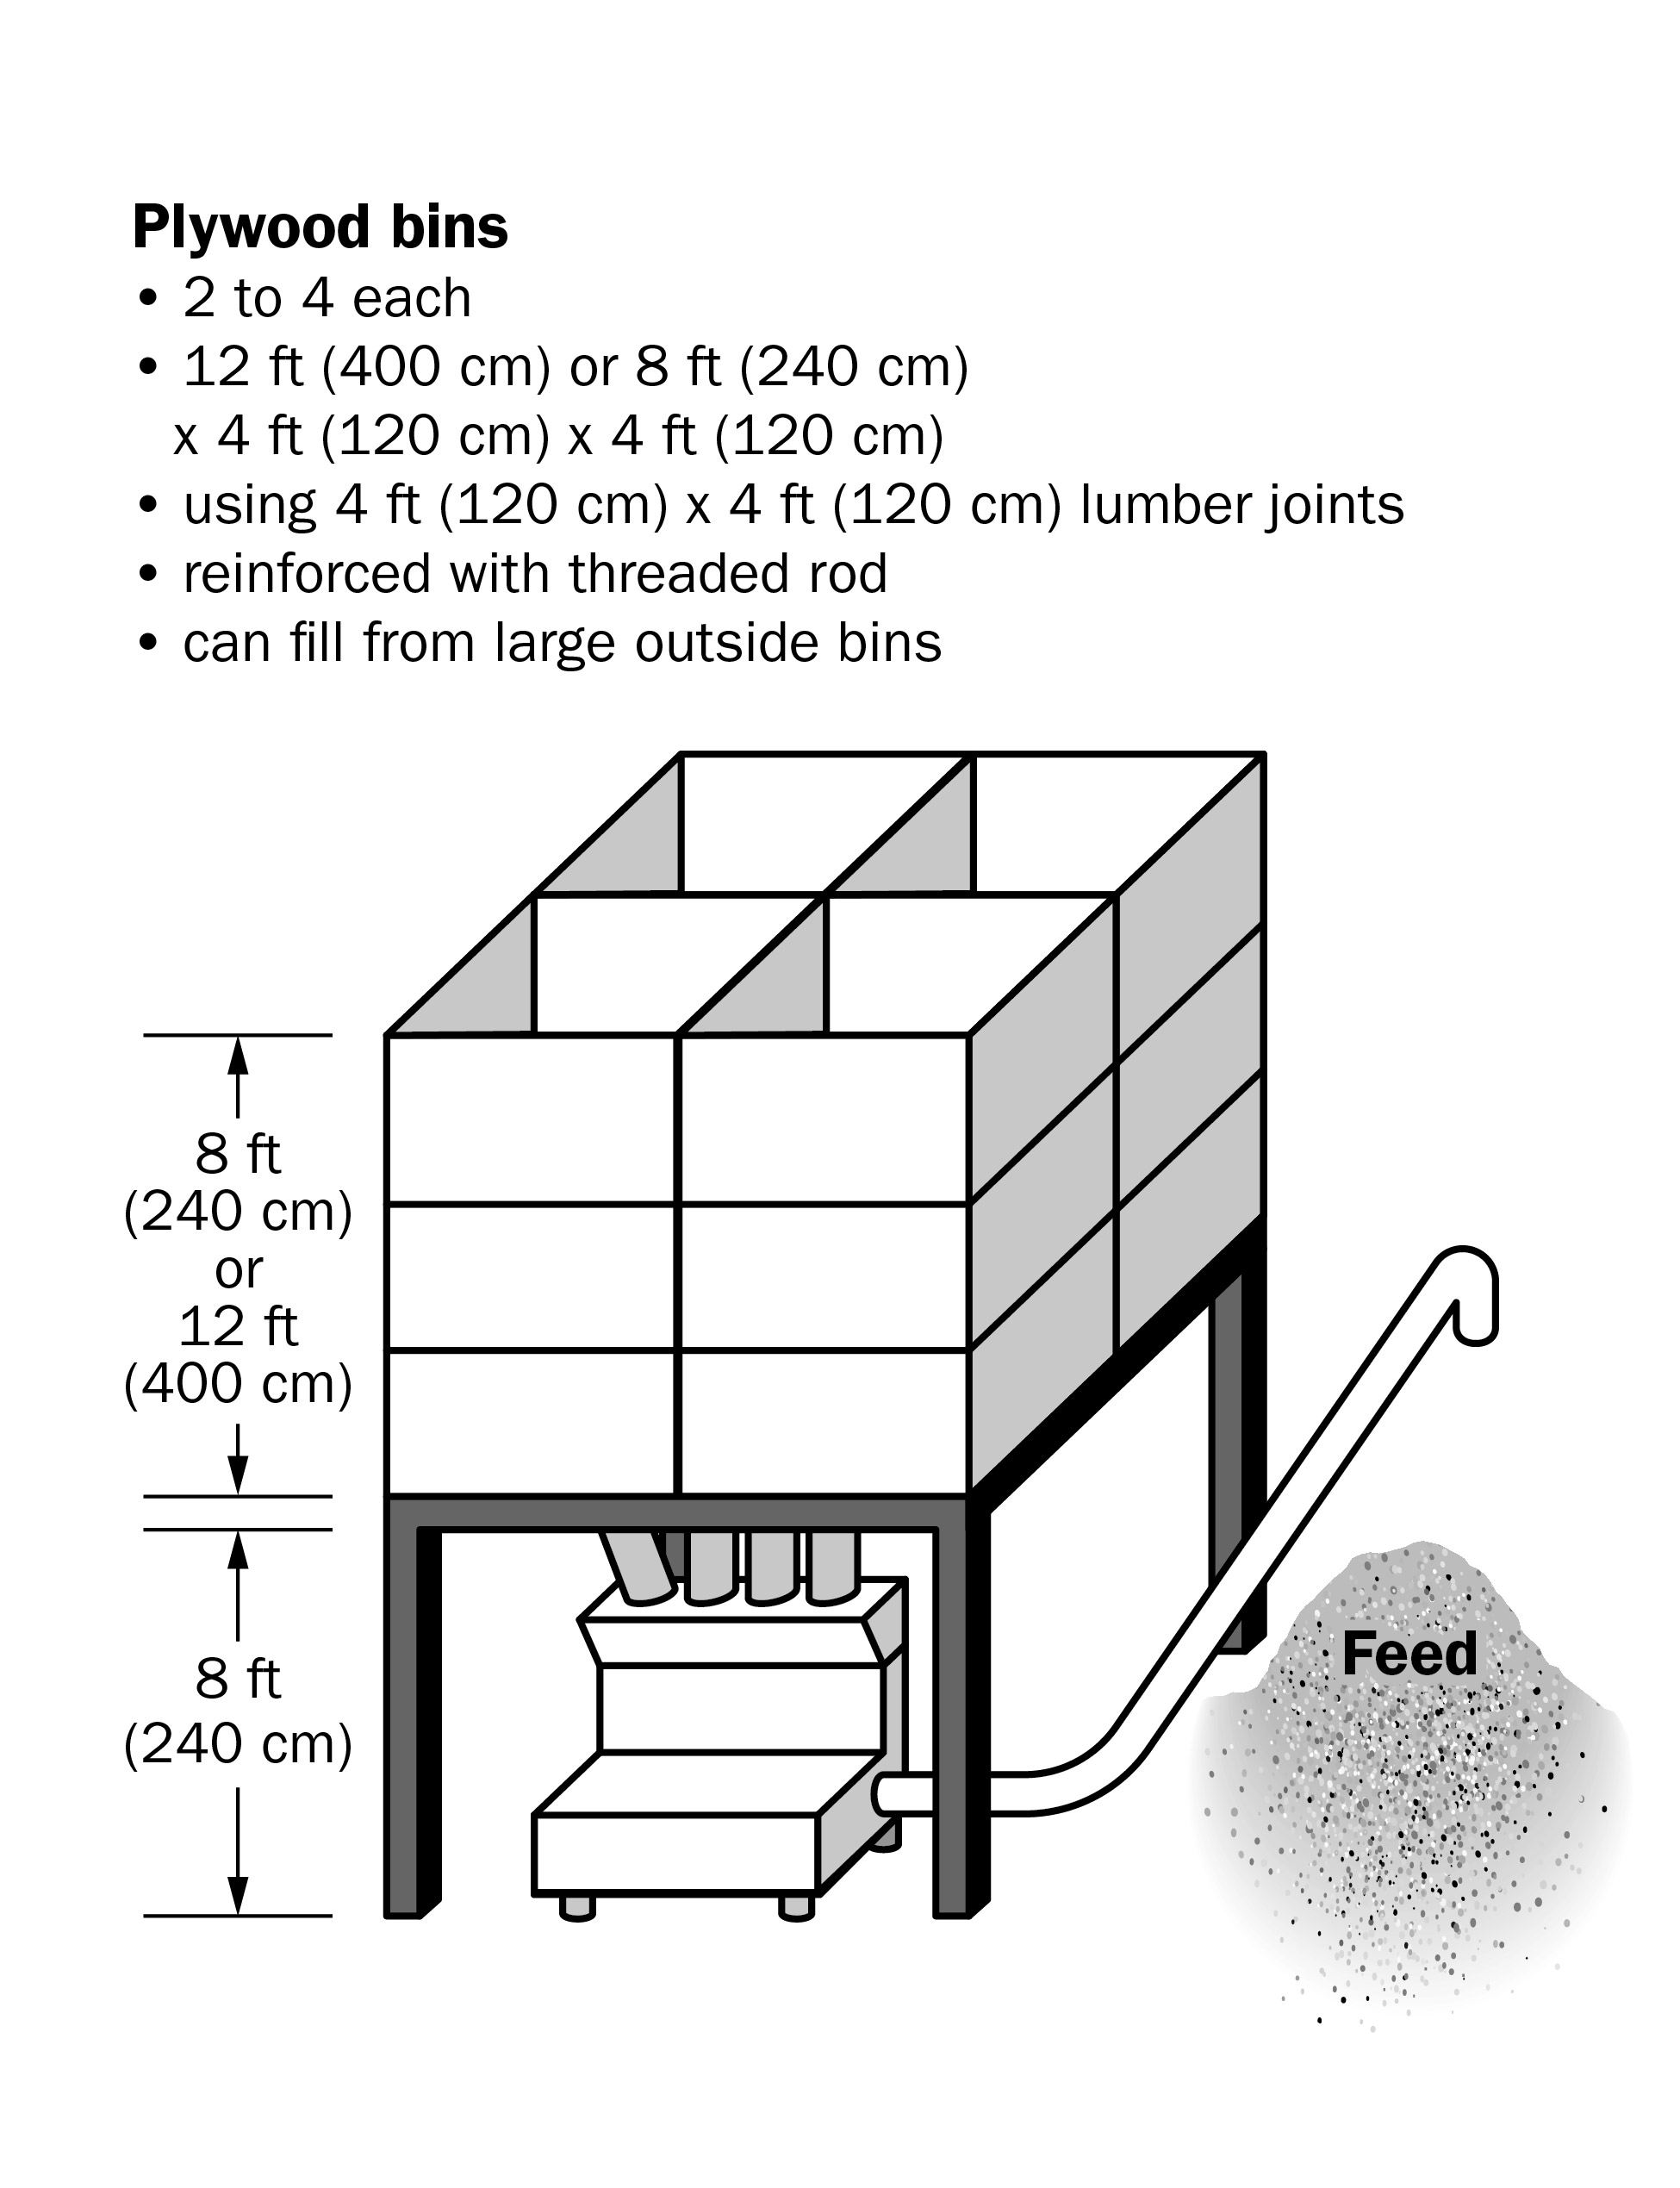 A 3D schematic showing the components needed to build a volumetric feed proportioner. The schematic shows a rectangular wooden box divided into compartments on a stand with a mill and pipe underneath.